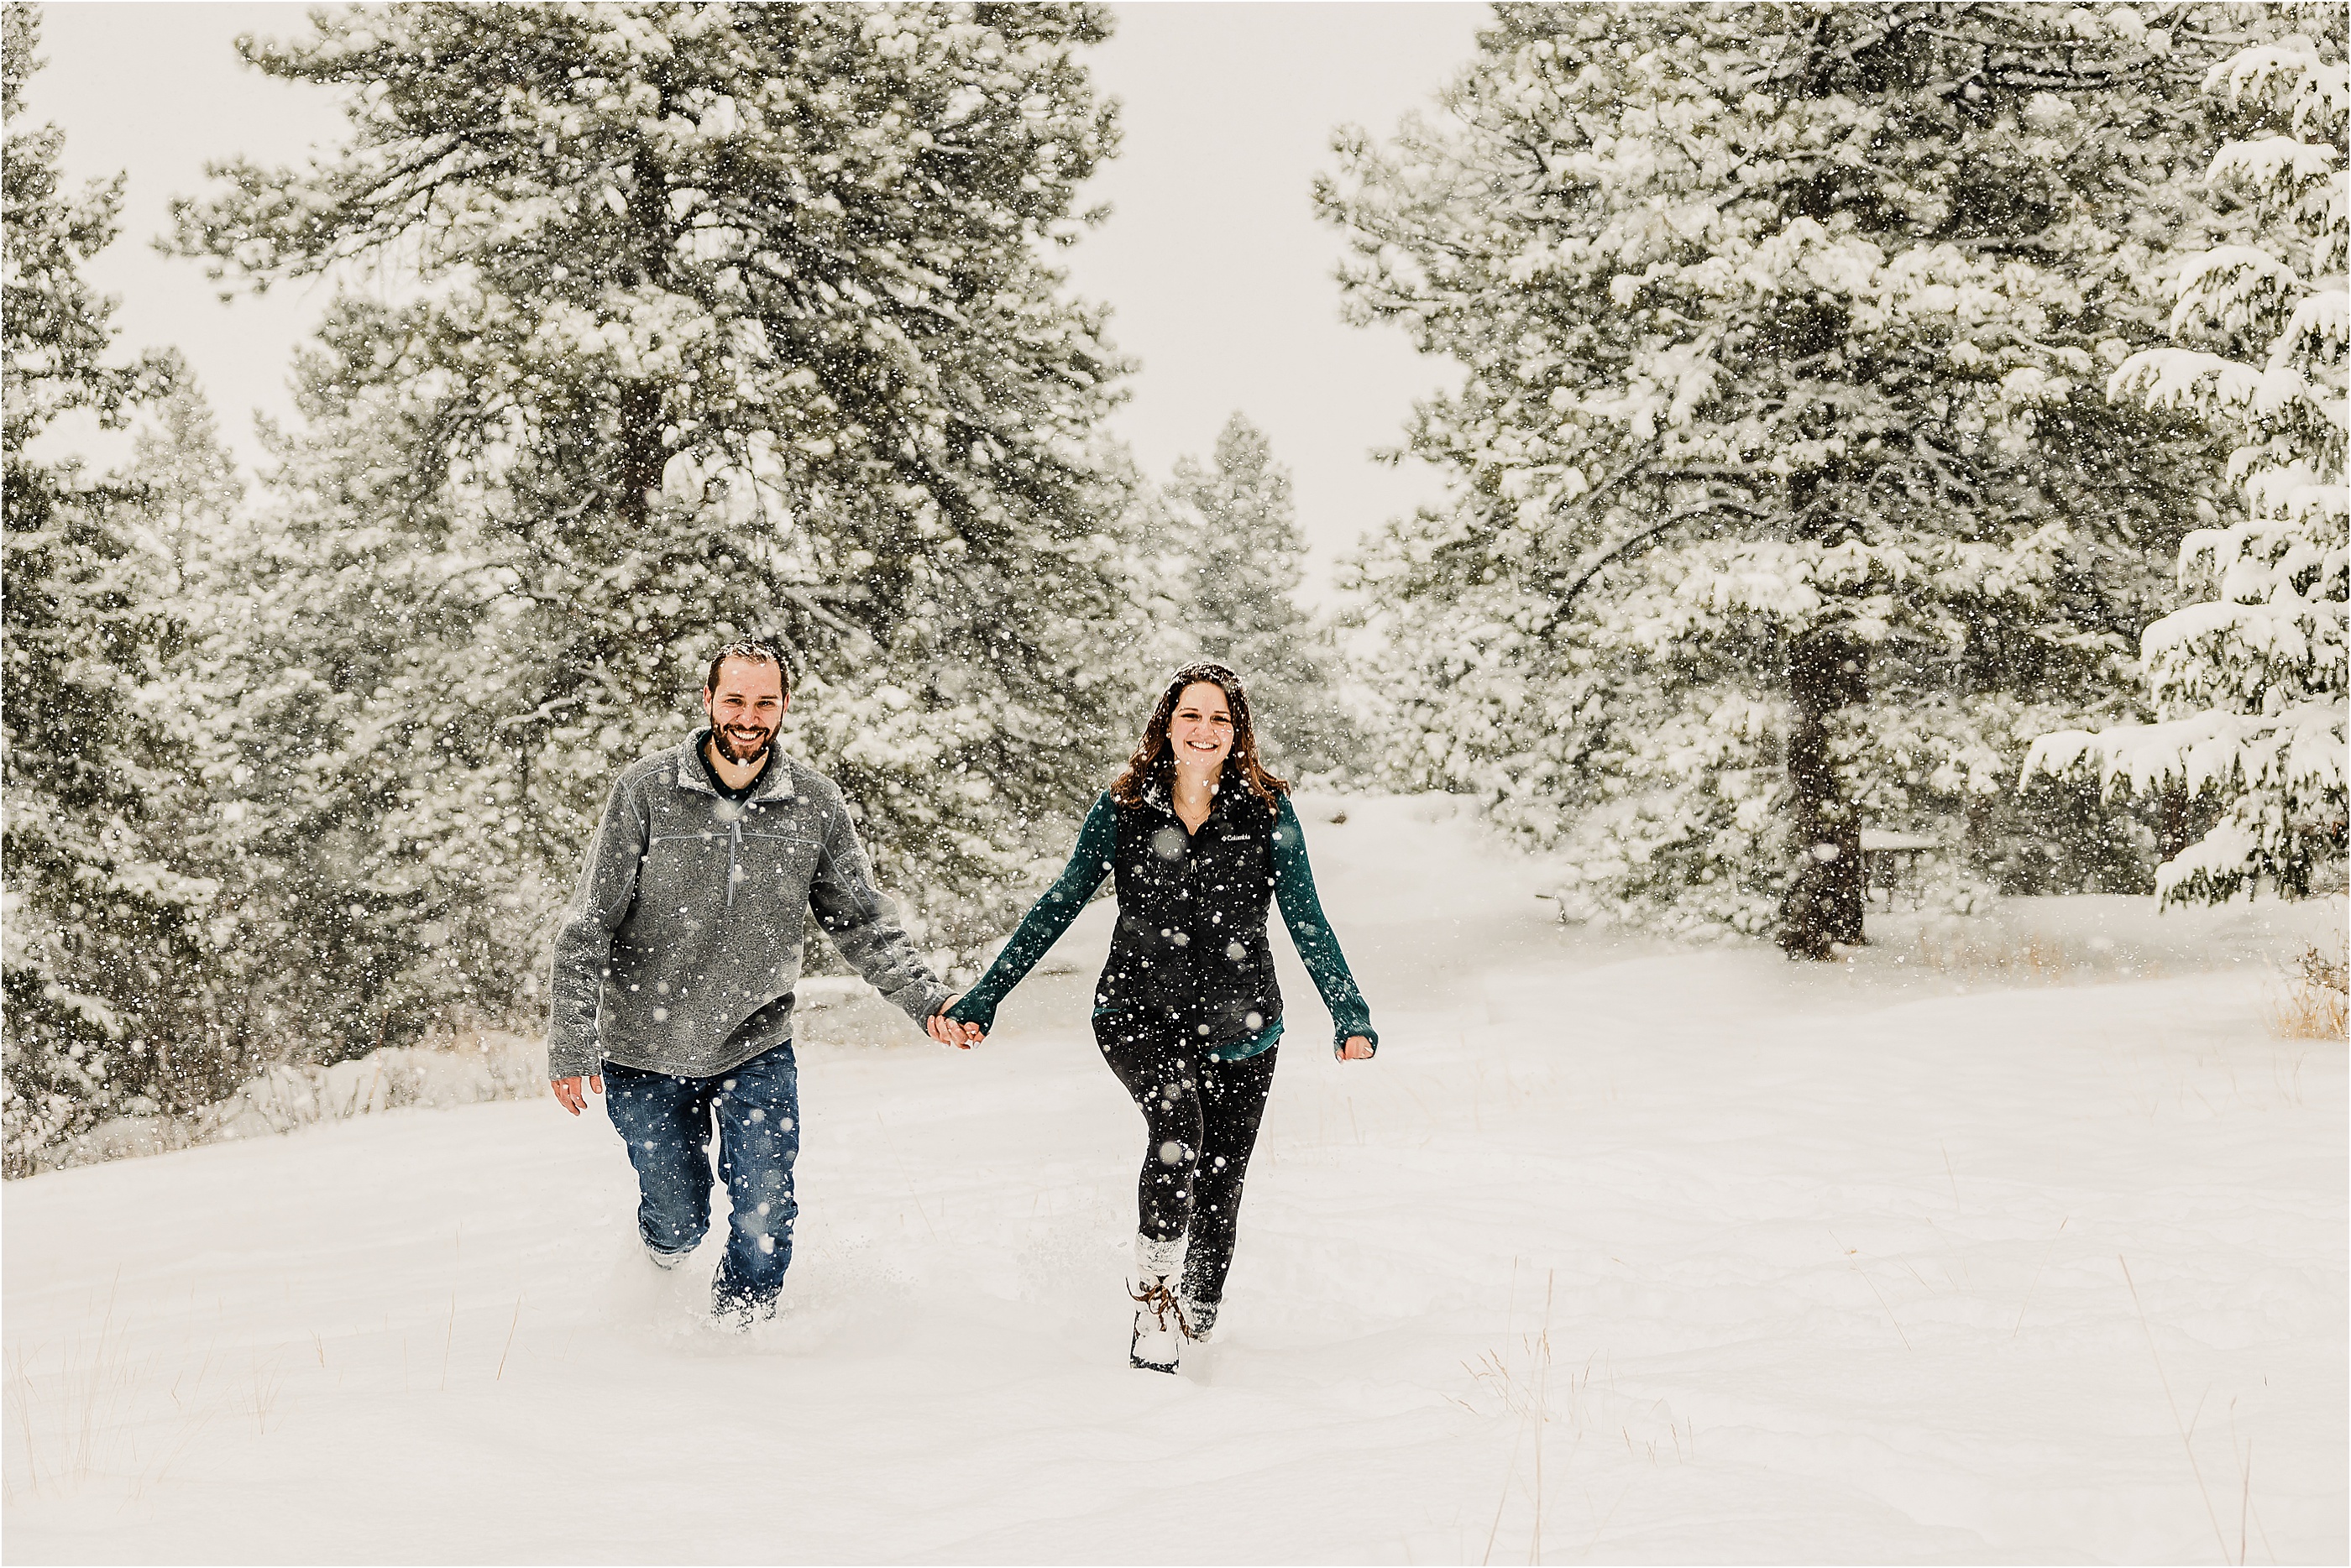 Winter Engagement Photos at Mount Falcon in Colorado. Couple running in snow